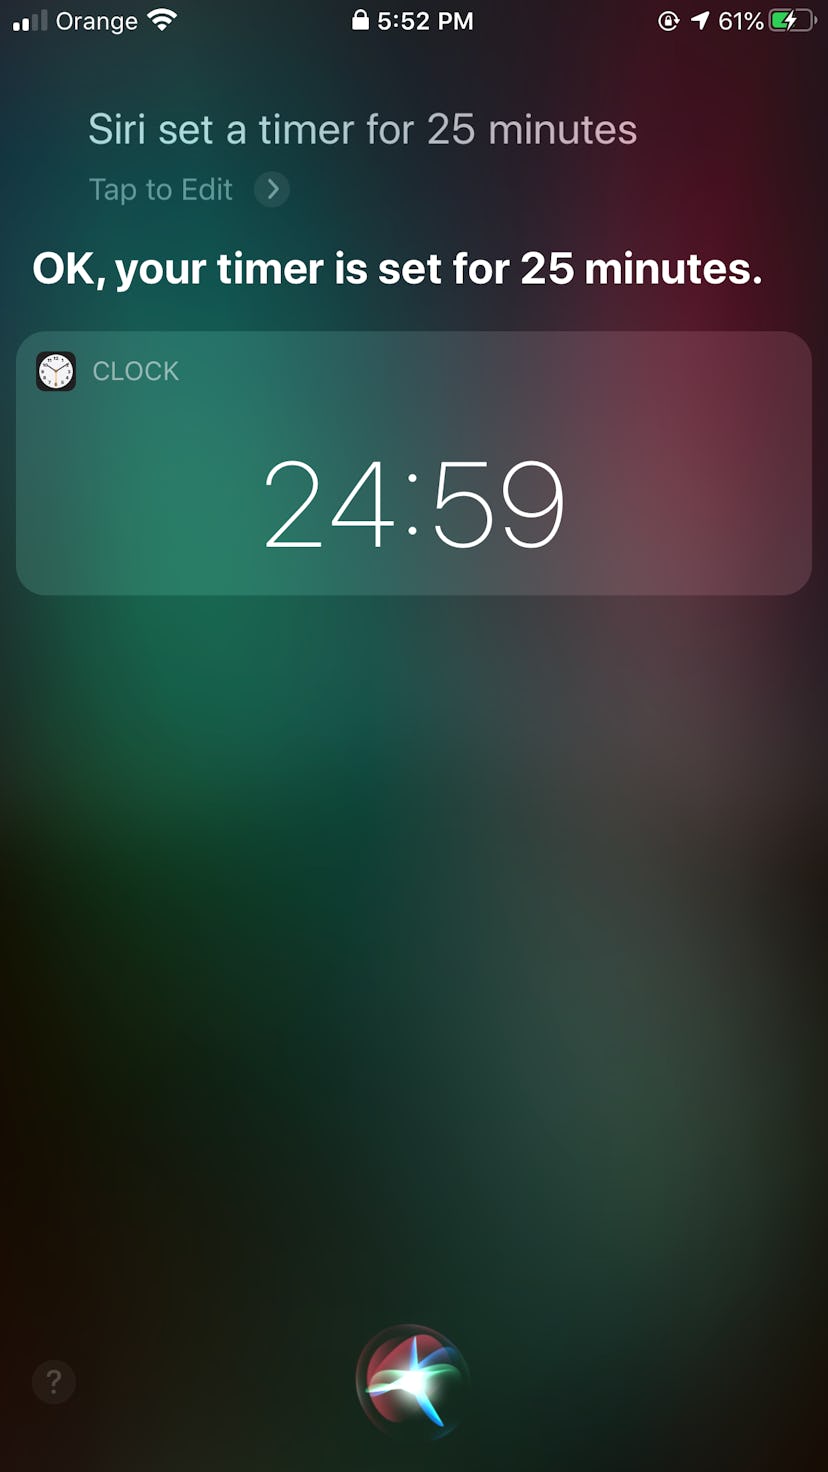 Siri lets you set timers for different tasks just by using your voice. 